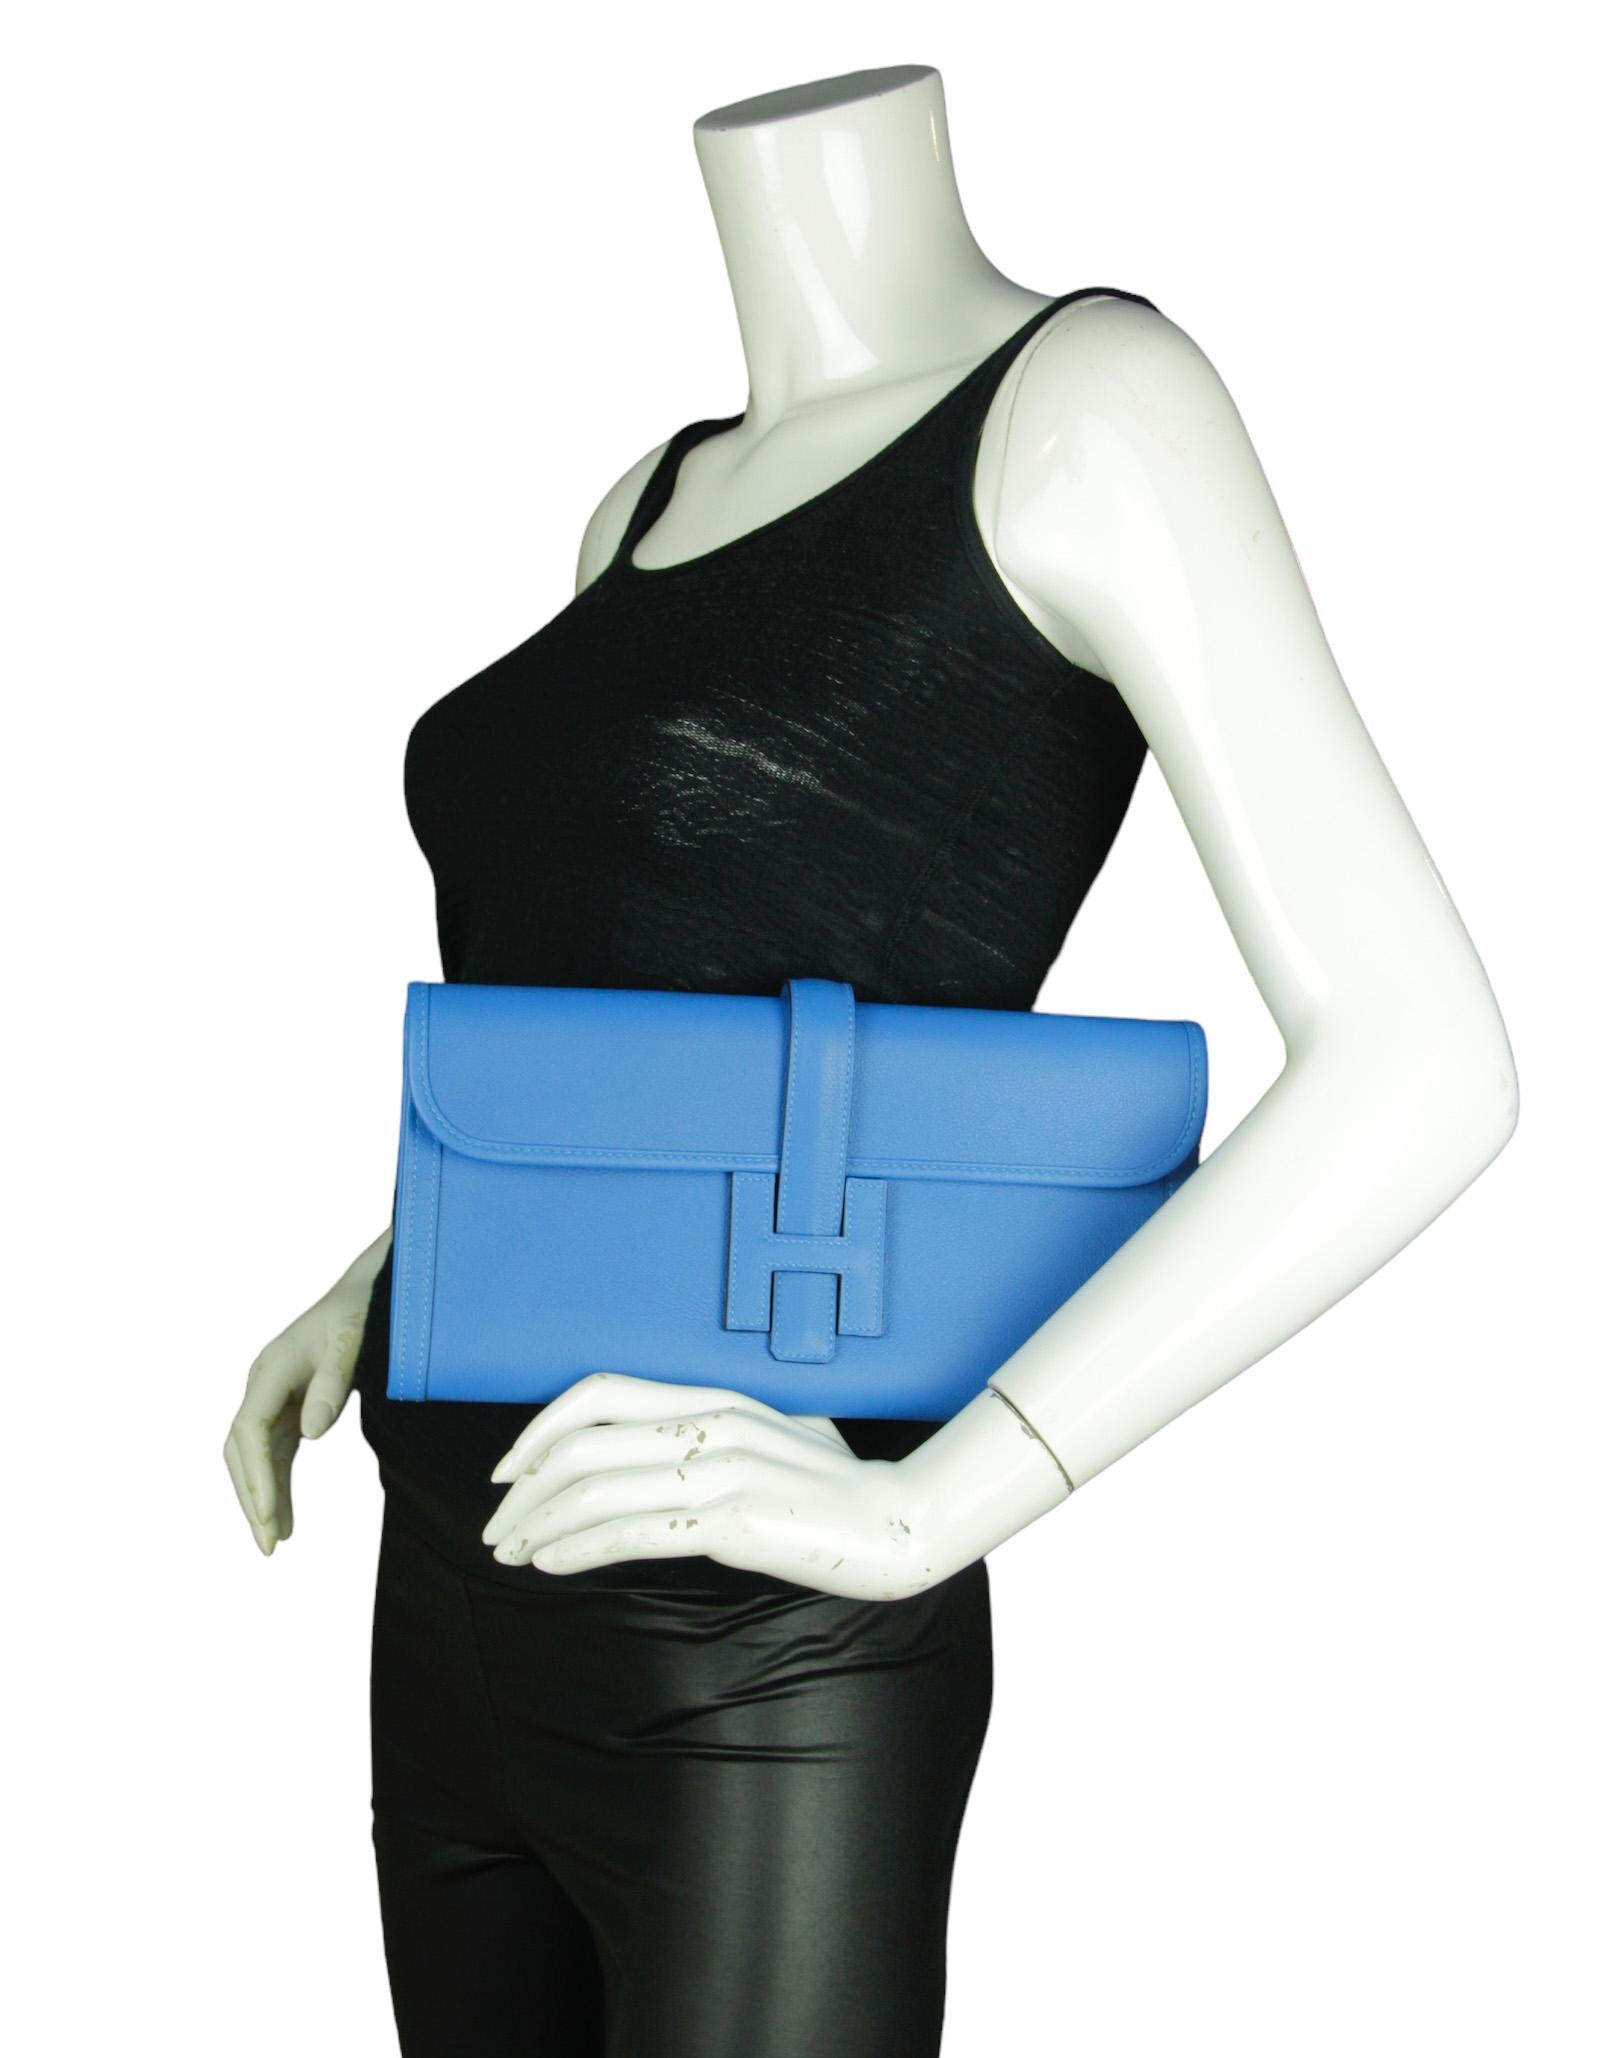 Hermes Blue Swift Leather Jige Elan Clutch Bag

Made In: France
Year of Production: 2020
Color: Blue
Materials: Swift leather
Lining: Smooth leather
Closure/Opening: Flap top w/slide strap through H
Exterior Condition: Excellent
Interior Condition: